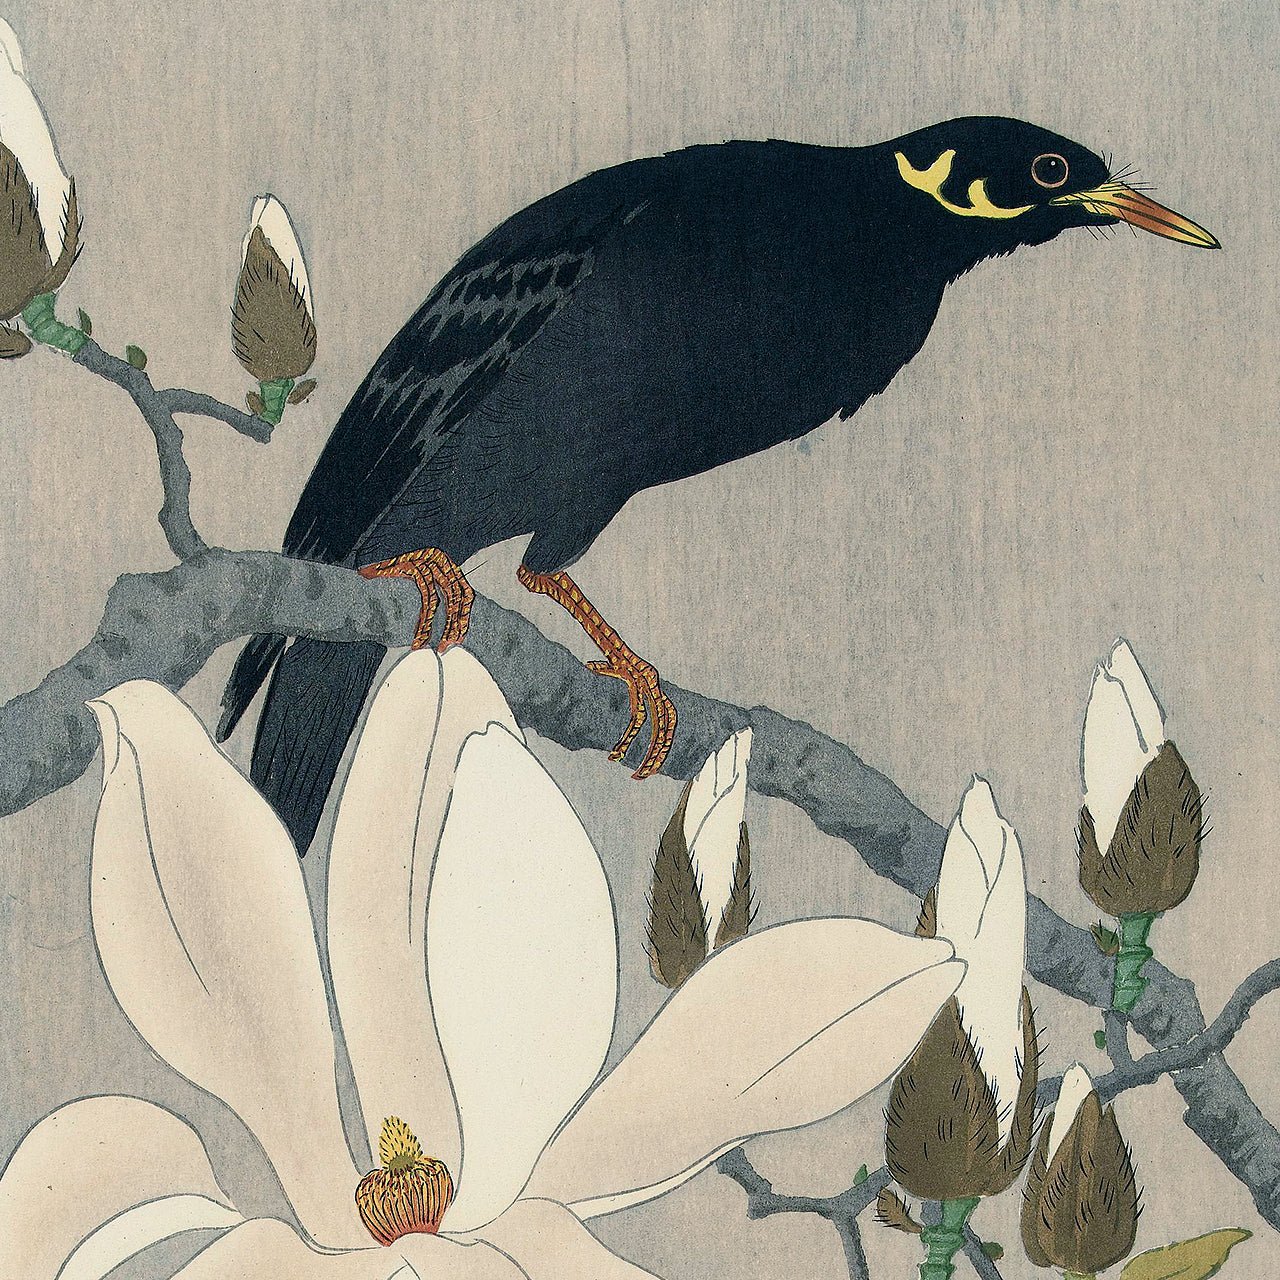 Myna on Magnolia Branch - Japonica Graphic